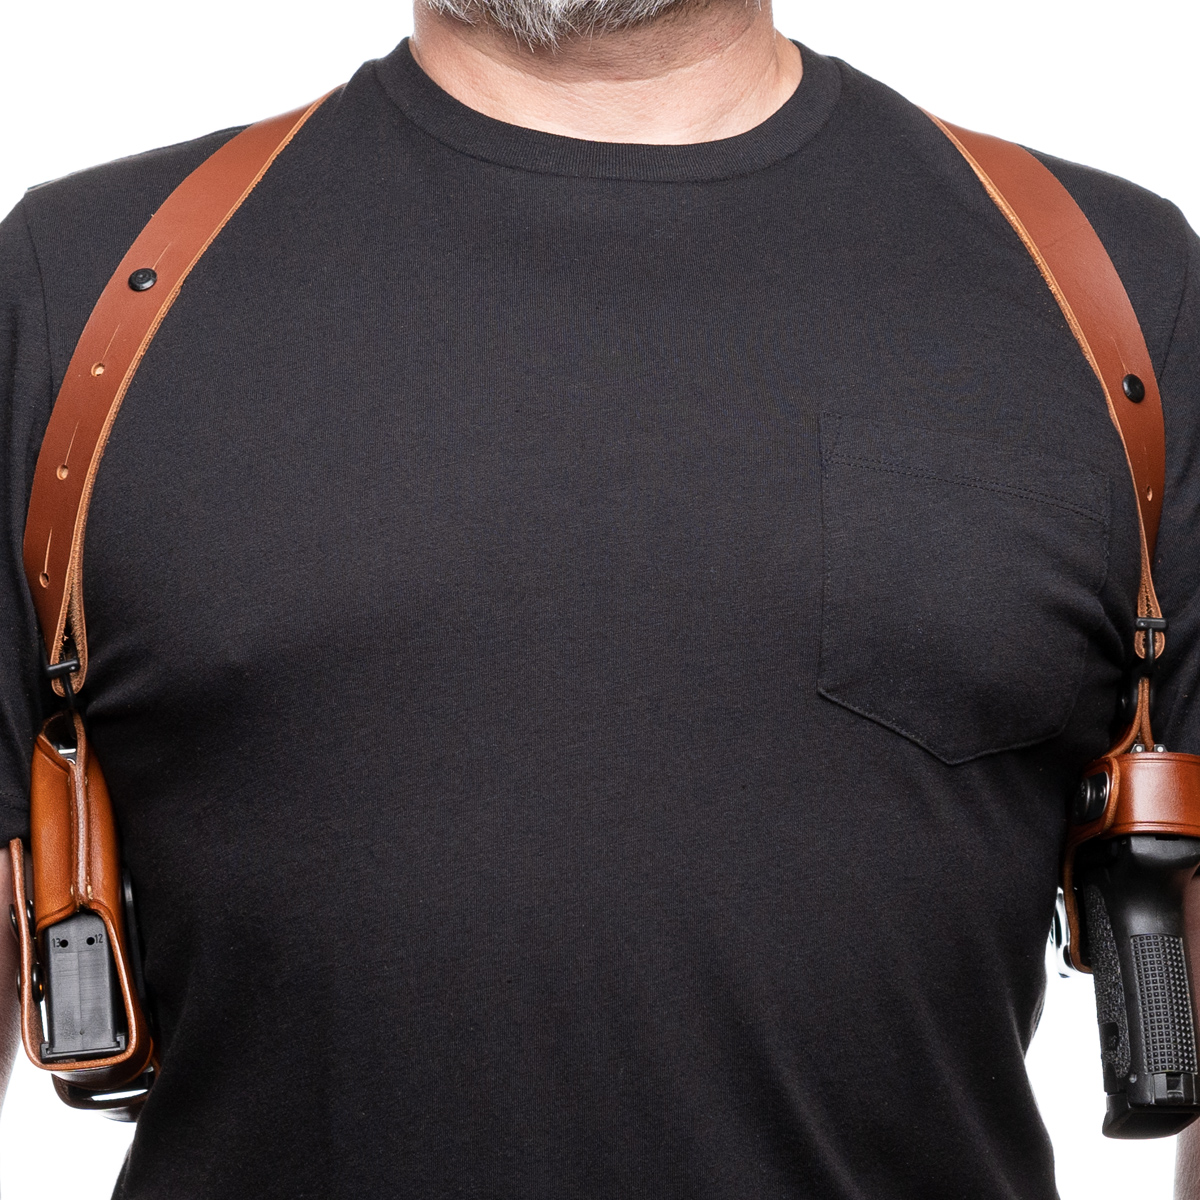 Galco 1in Wide XL Harness for System Tan SSHX10